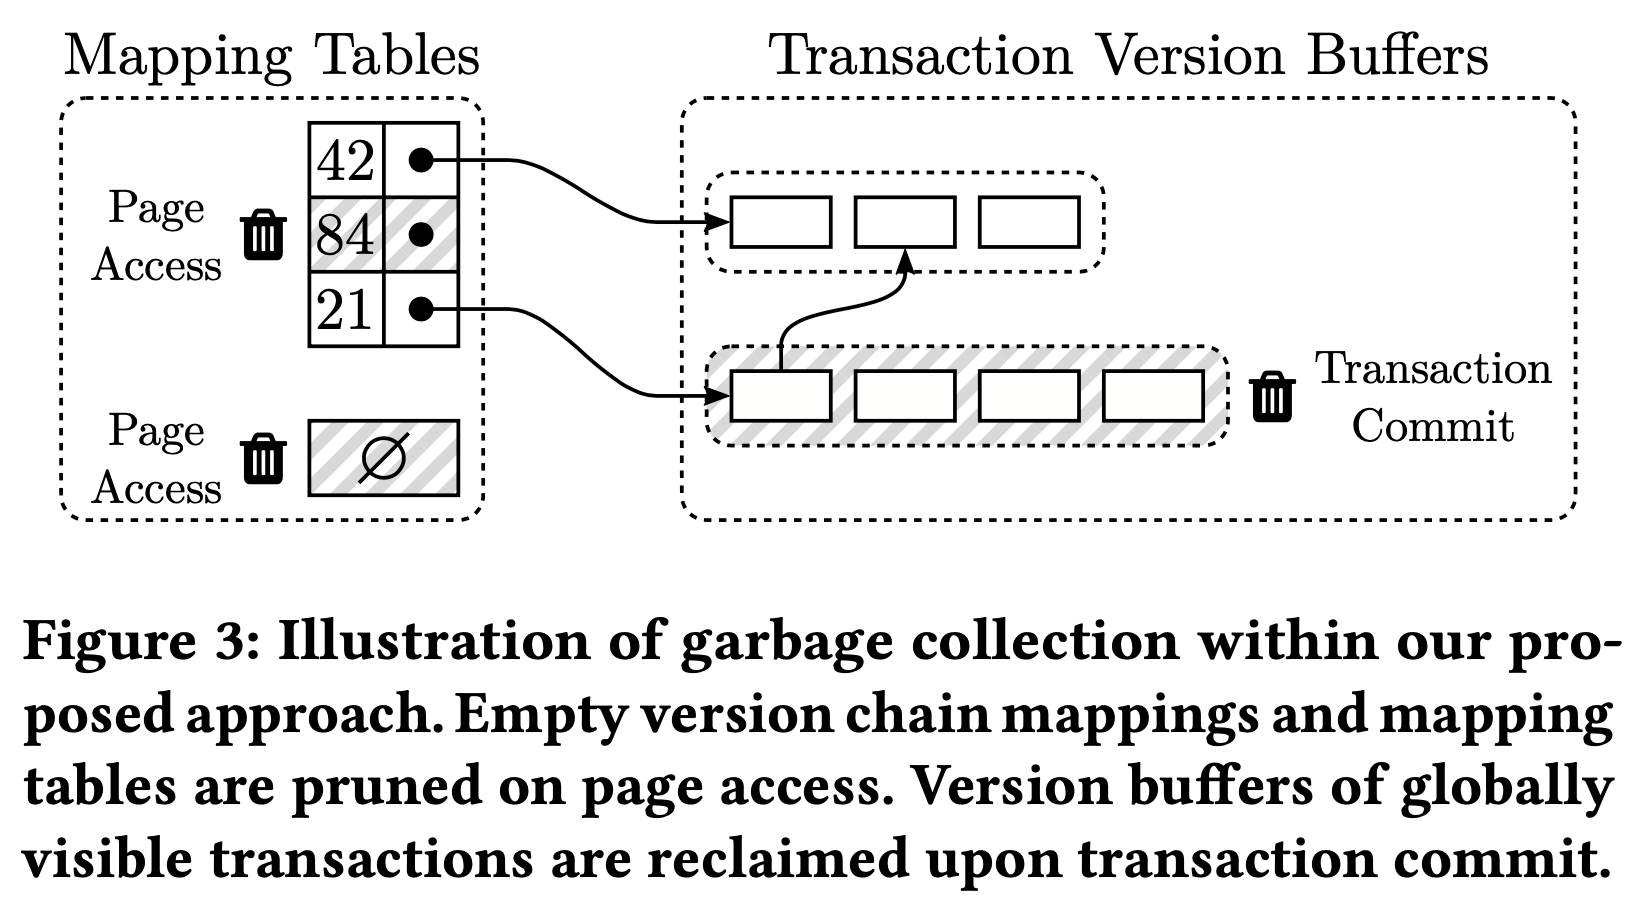 Figure 3: Illustration of garbage collection within our pro- posed approach